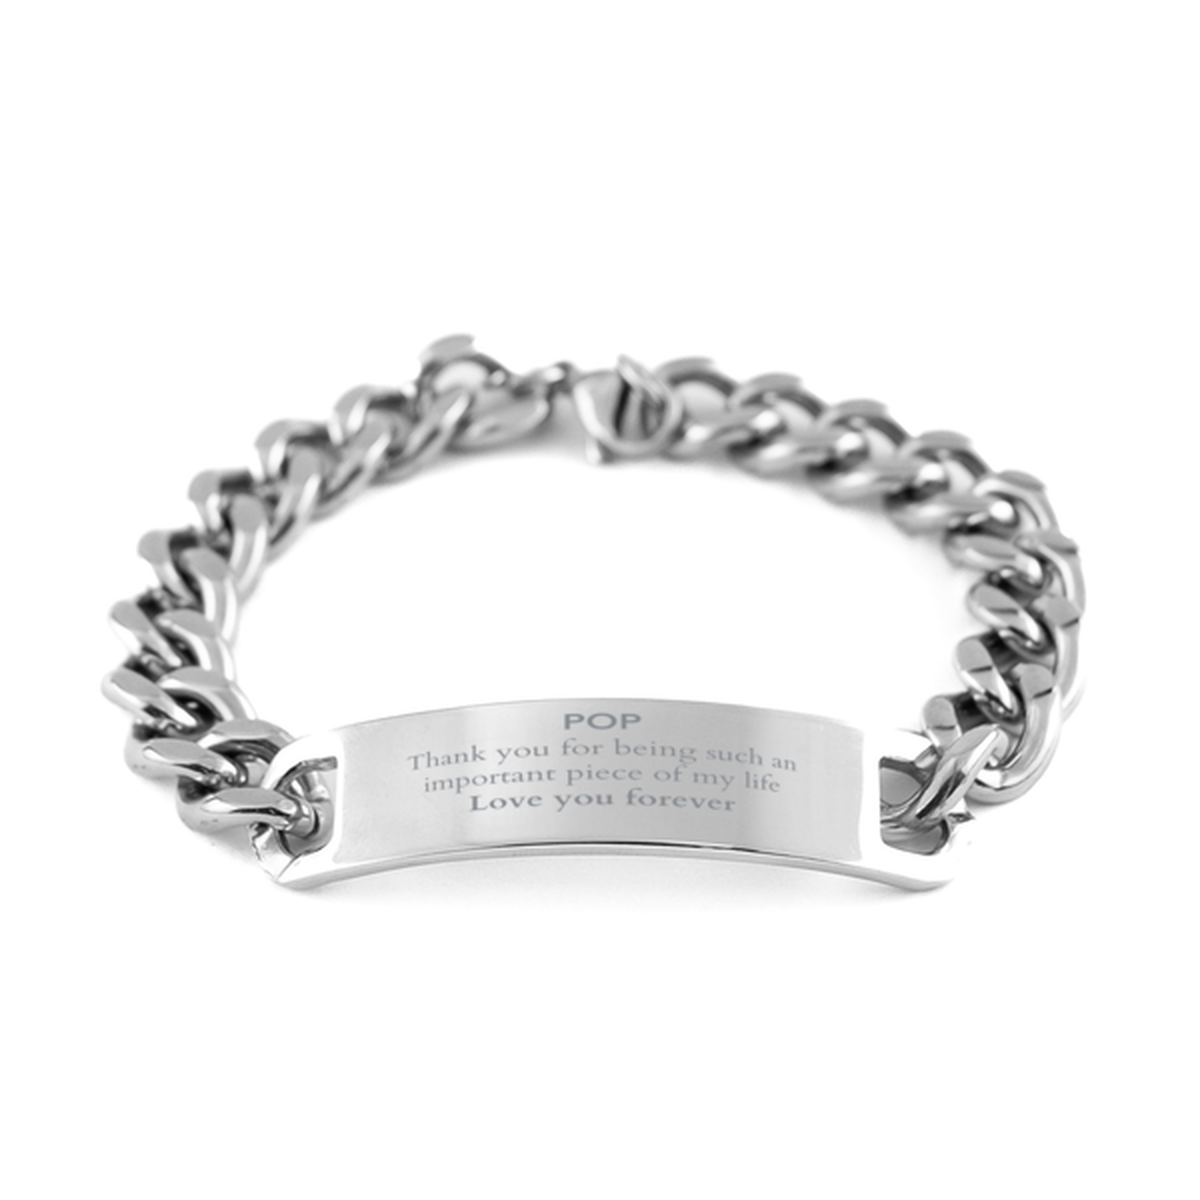 Appropriate Pop Cuban Chain Stainless Steel Bracelet Epic Birthday Gifts for Pop Thank you for being such an important piece of my life Pop Christmas Mothers Fathers Day